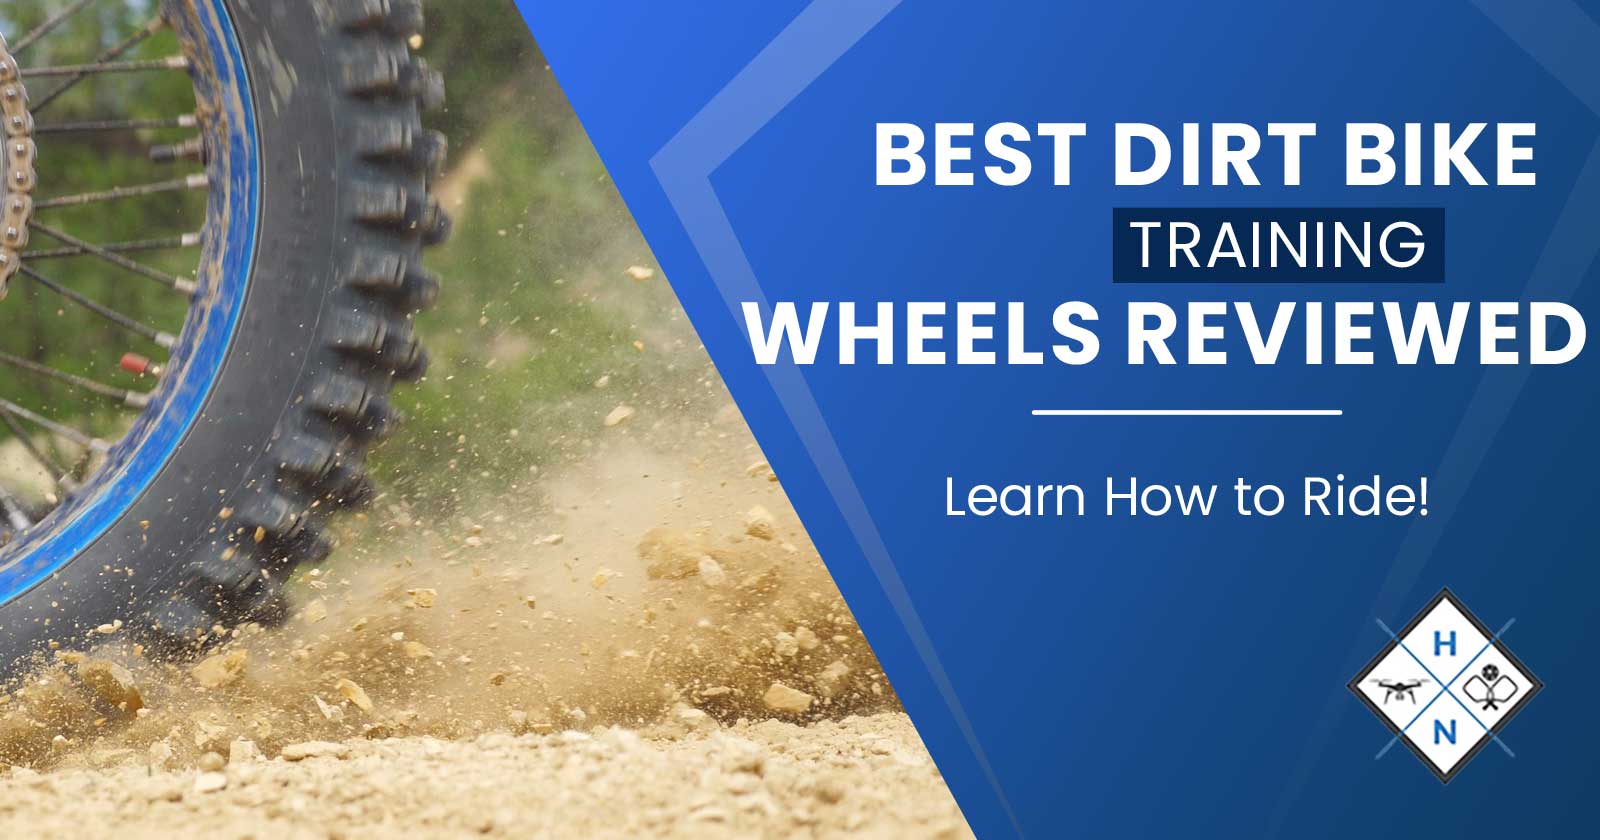 Best Dirt Bike Training Wheels Reviewed &#8211; Learn How to Ride!